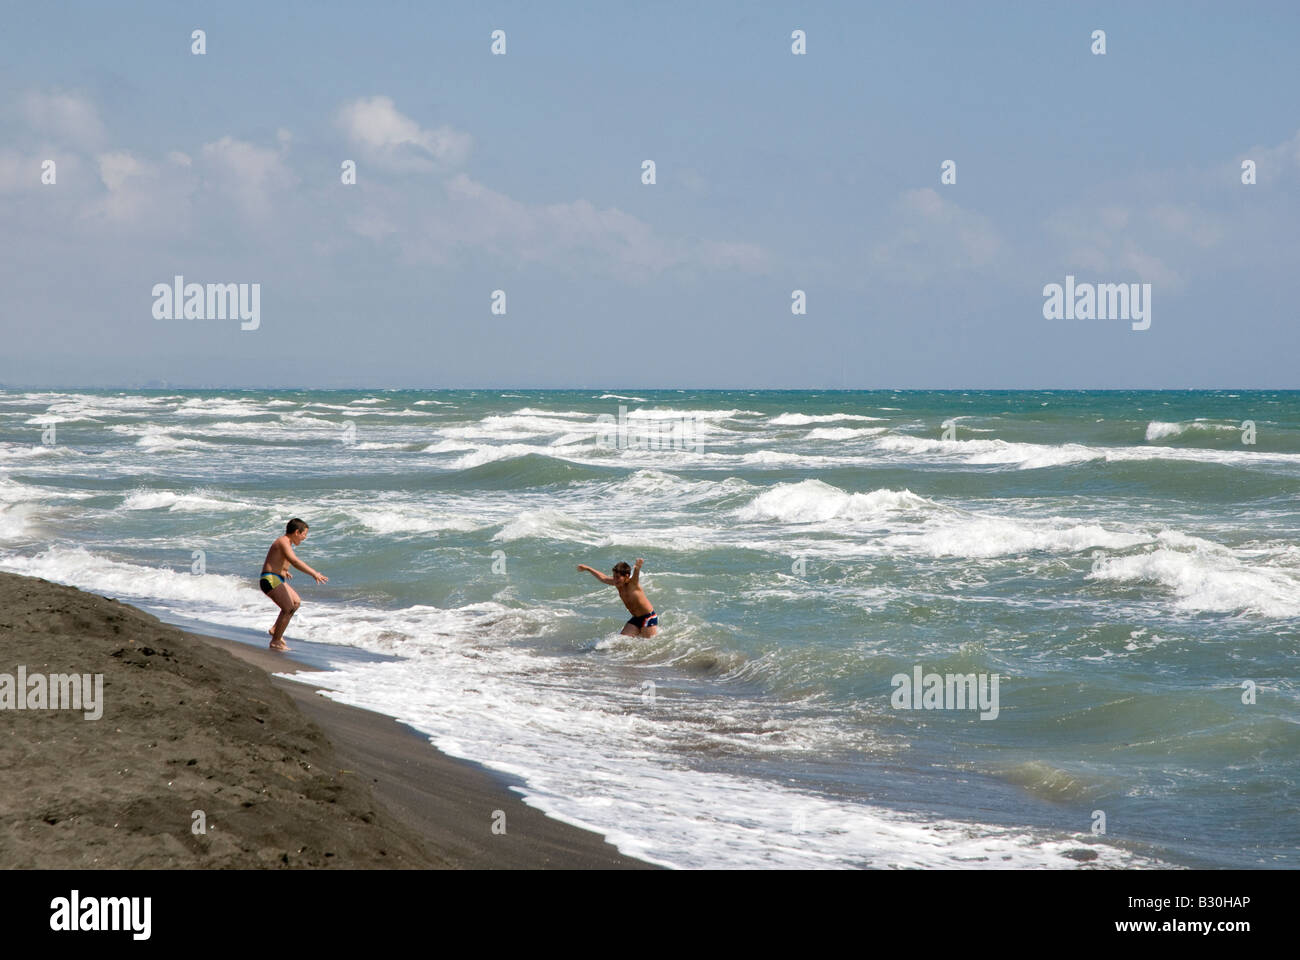 Two young boys playing in the waves at the Seaside resort of Montalto di Marina on the Mediterranean Stock Photo